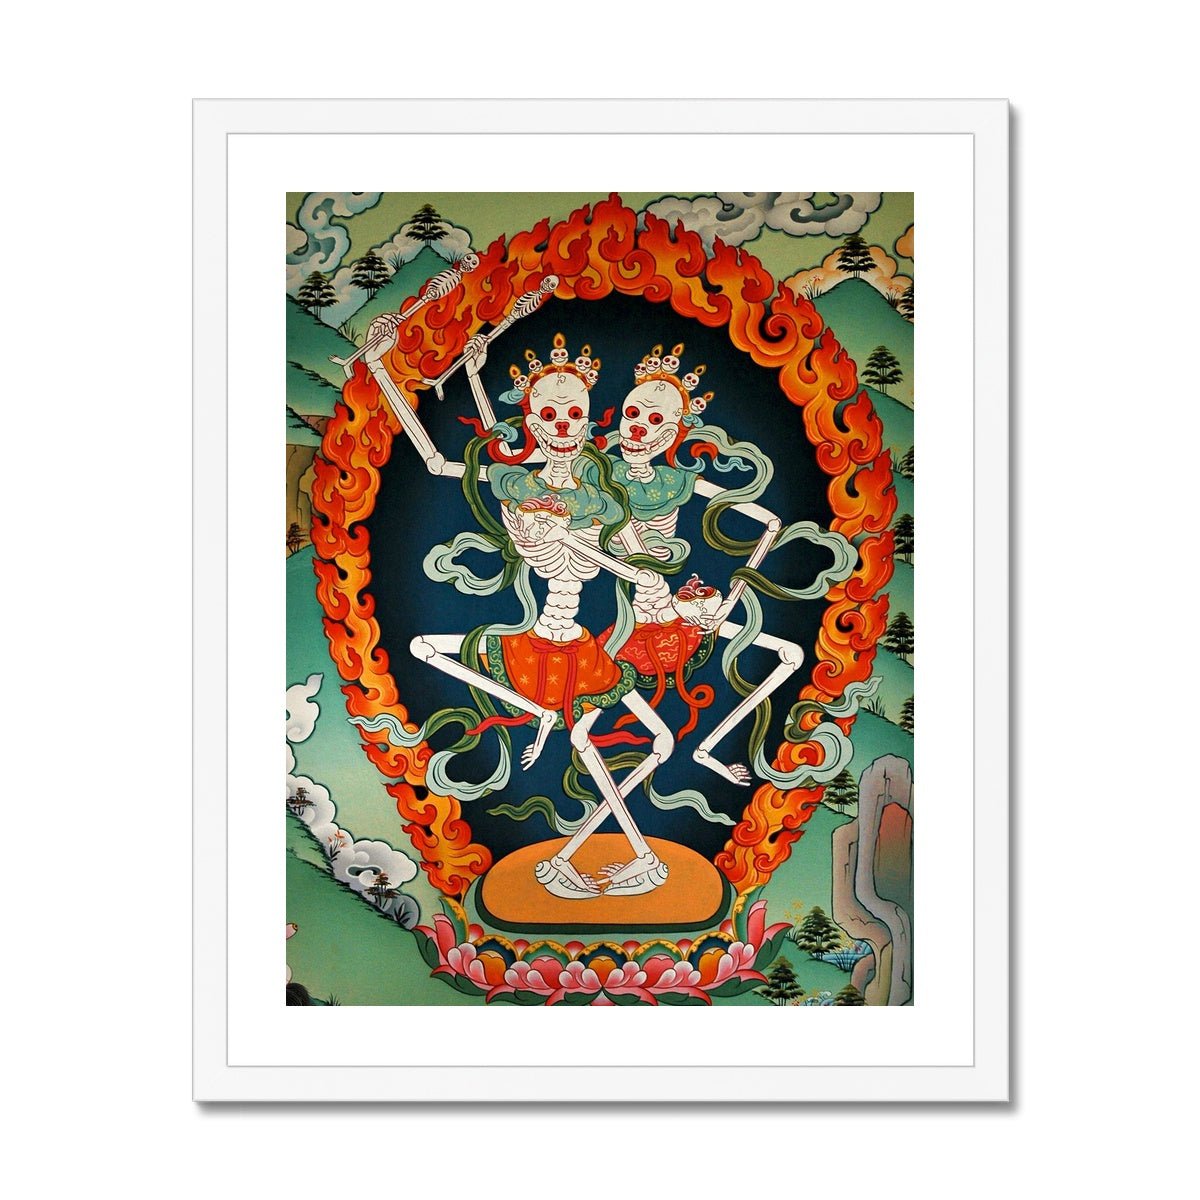 Framed Print 6"x8" / White Frame Citipati, Tibetan Protector, Thangka, Skeleton Lord and Lady of the Cemetery Nepal Buddhist Decor Wall Art Framed Art Print